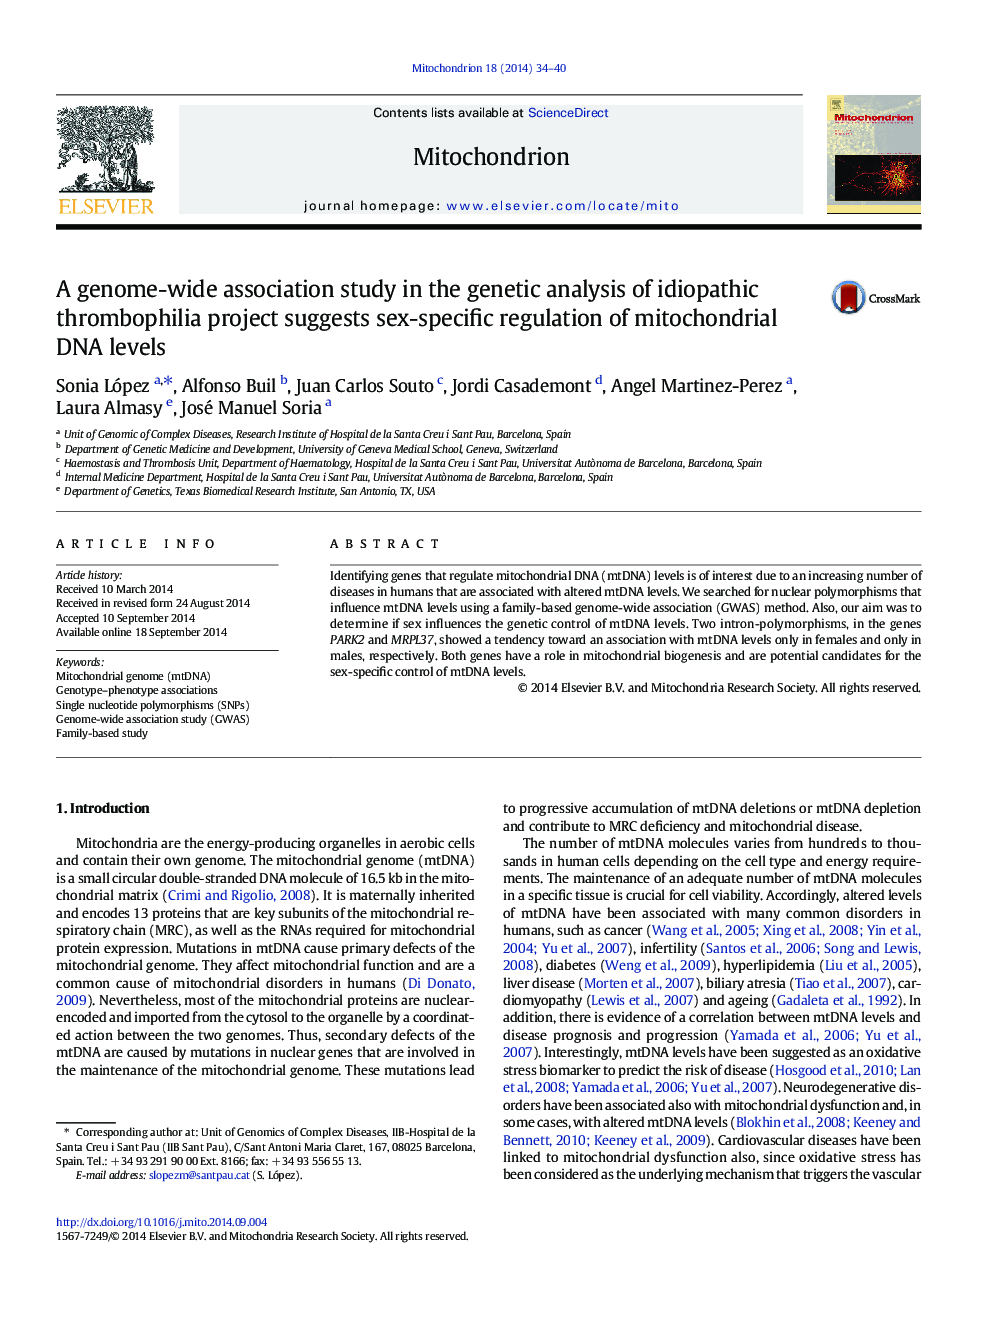 A genome-wide association study in the genetic analysis of idiopathic thrombophilia project suggests sex-specific regulation of mitochondrial DNA levels